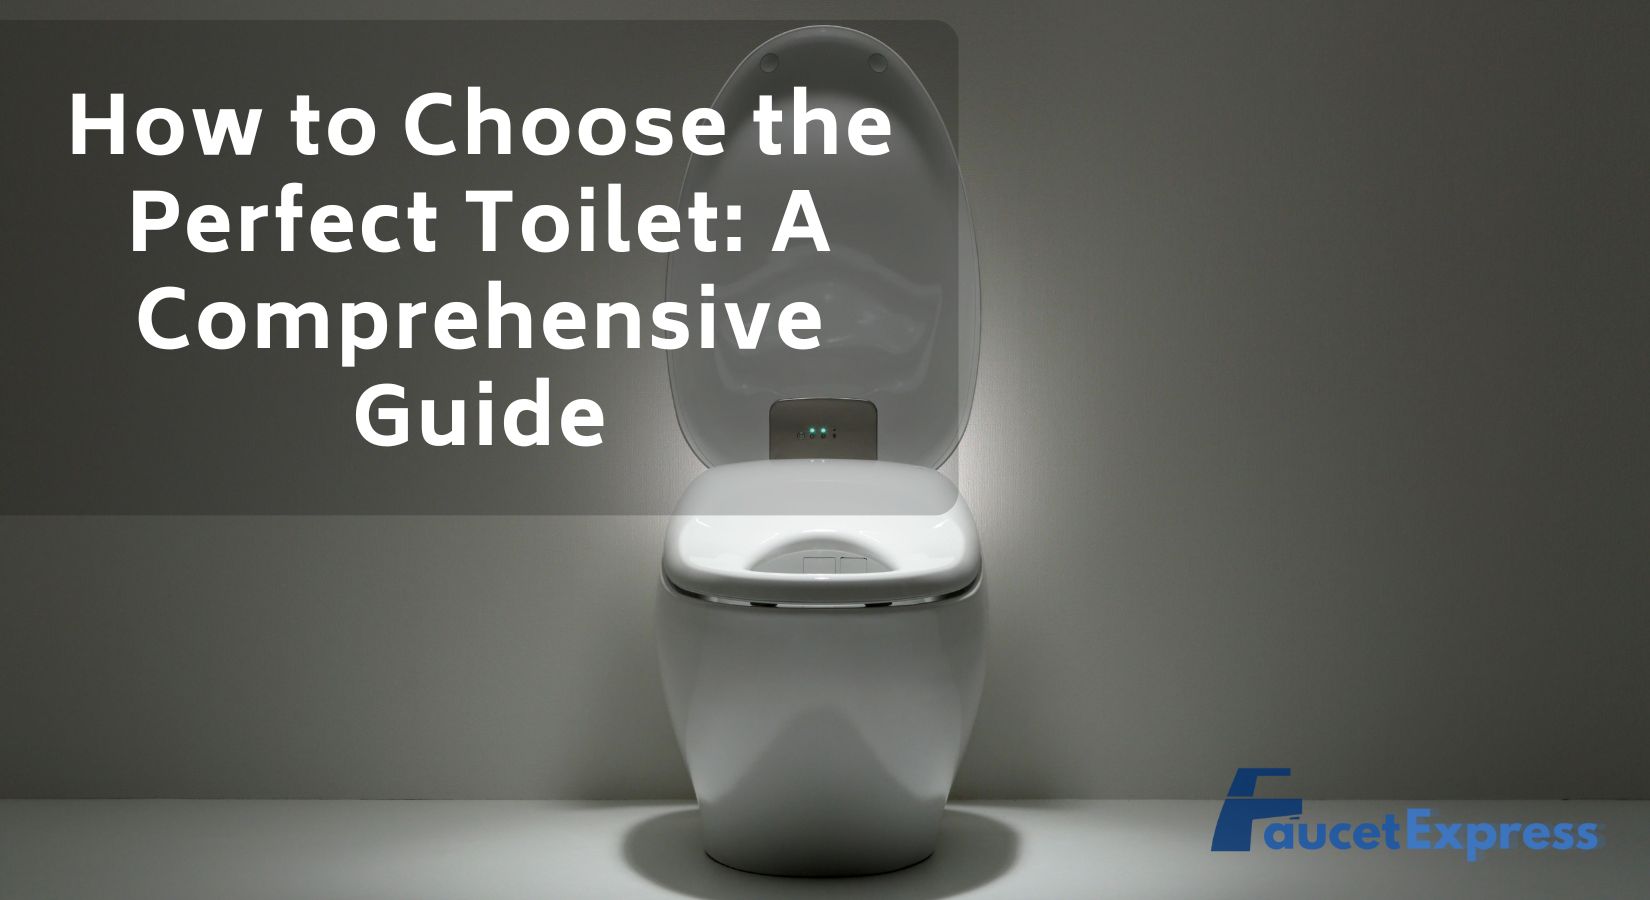 How to Choose the Perfect Toilet: A Comprehensive Guide